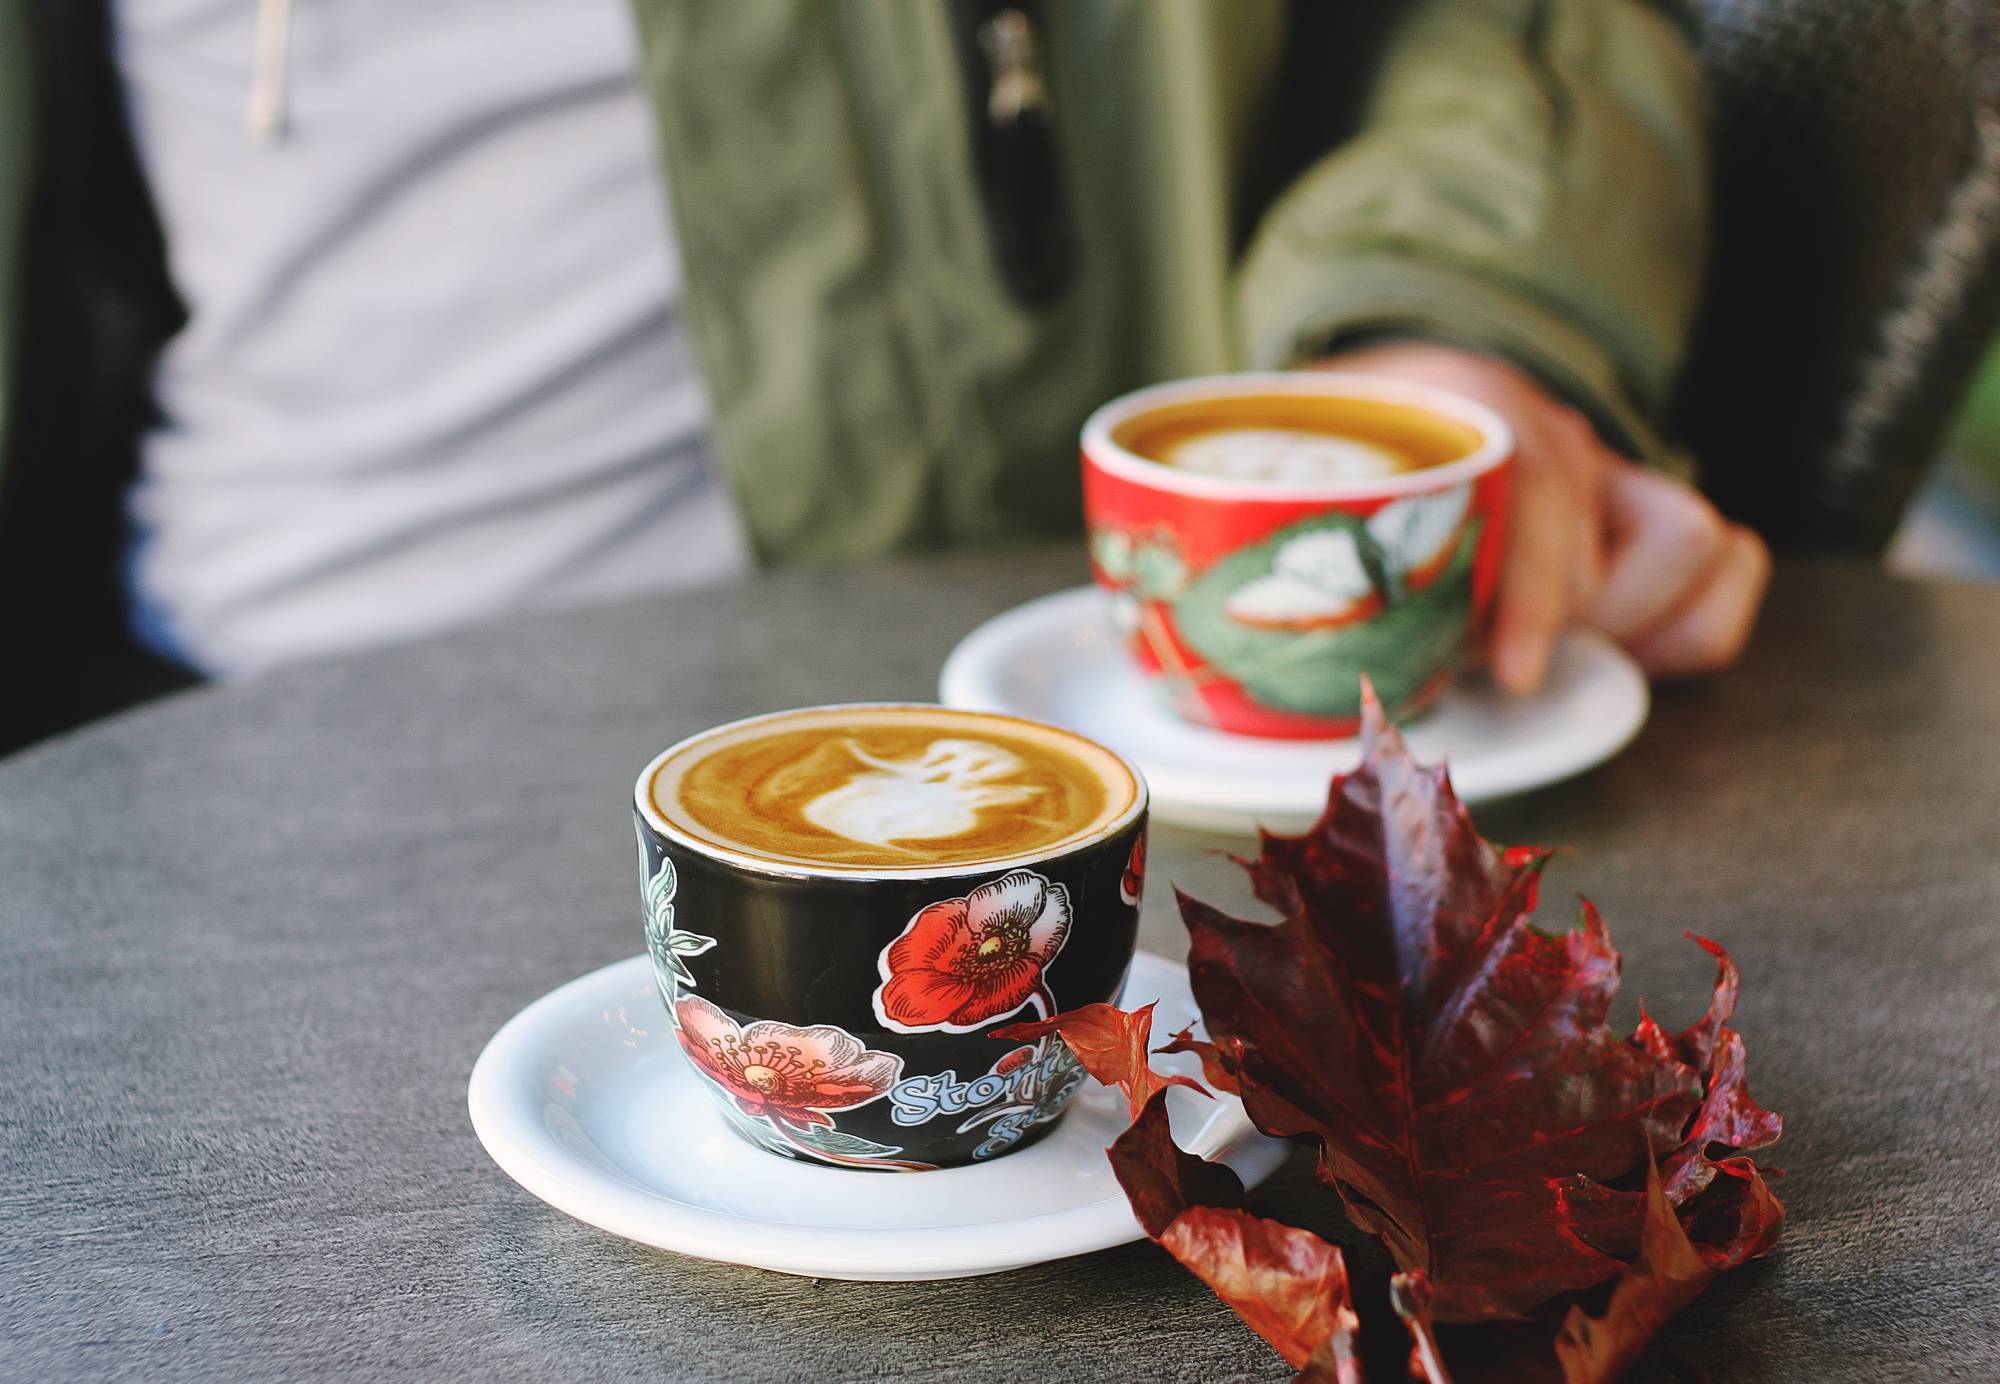 Two lattes with ghost latte art, and a red fall leaf sitting on a table.